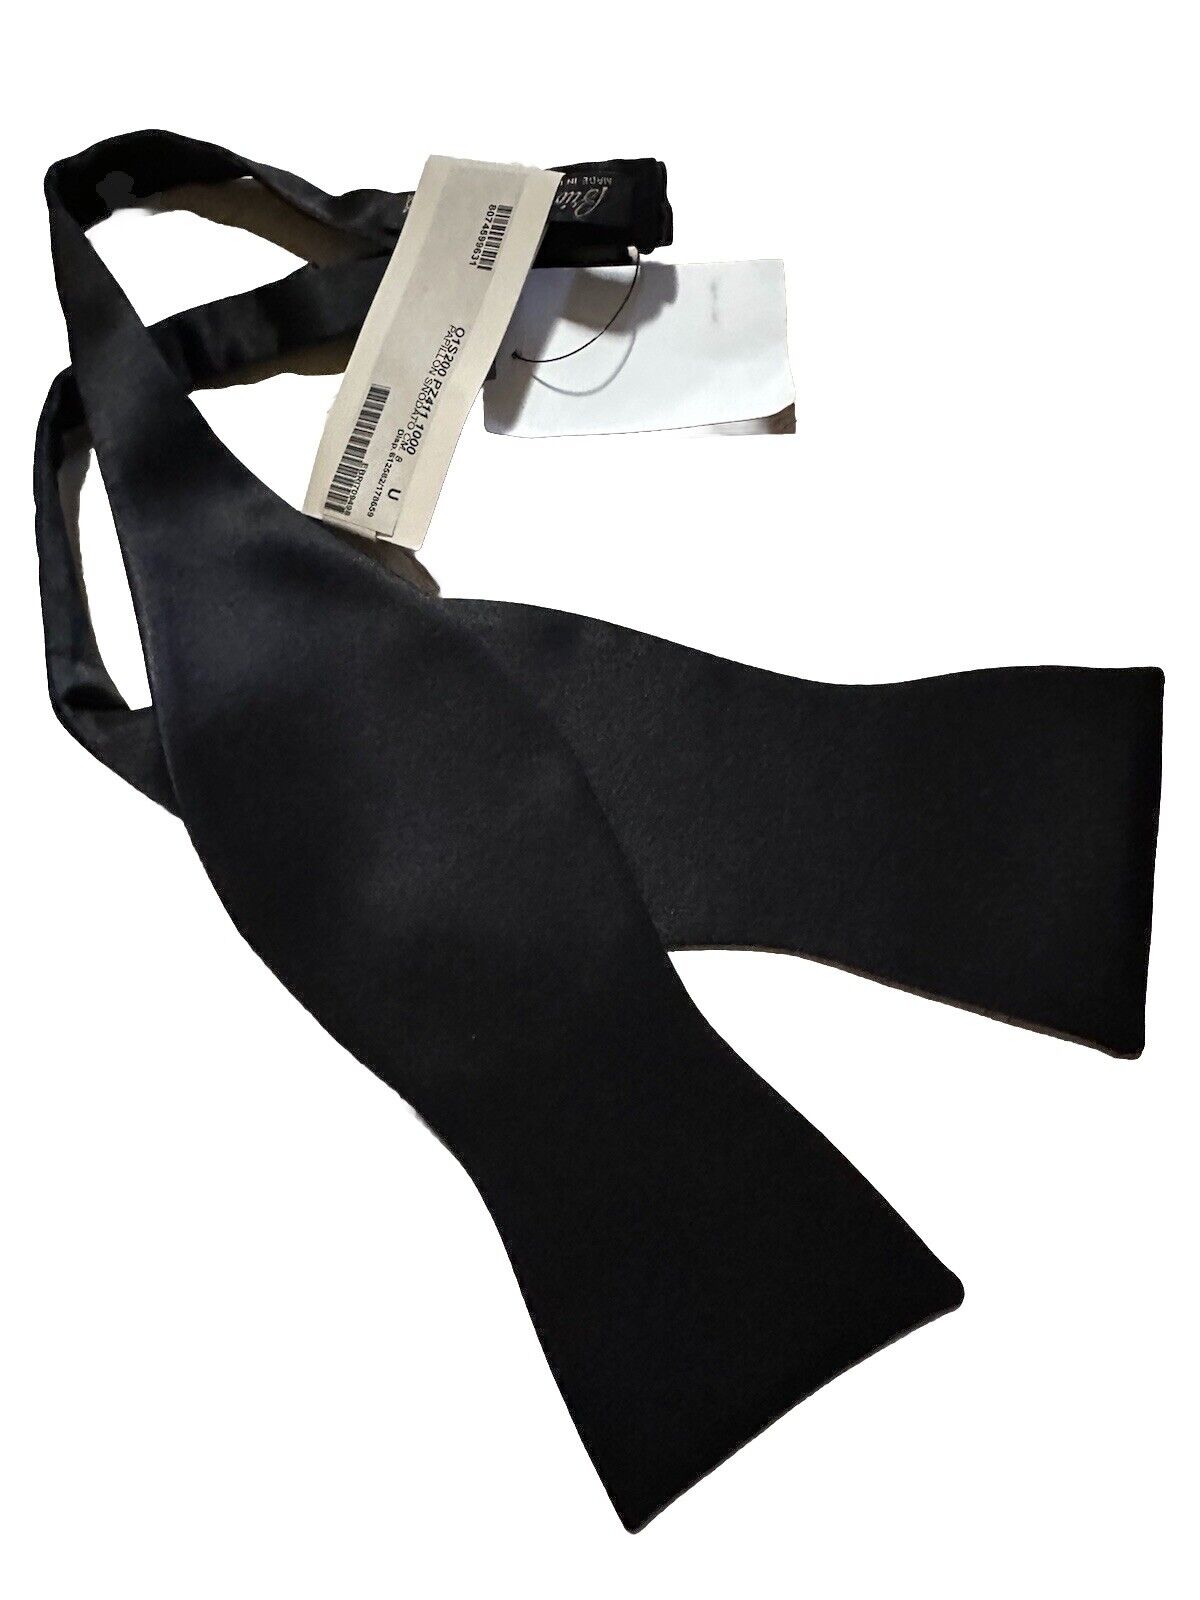 Brioni Silk Bow Black New $390 Made in Italy